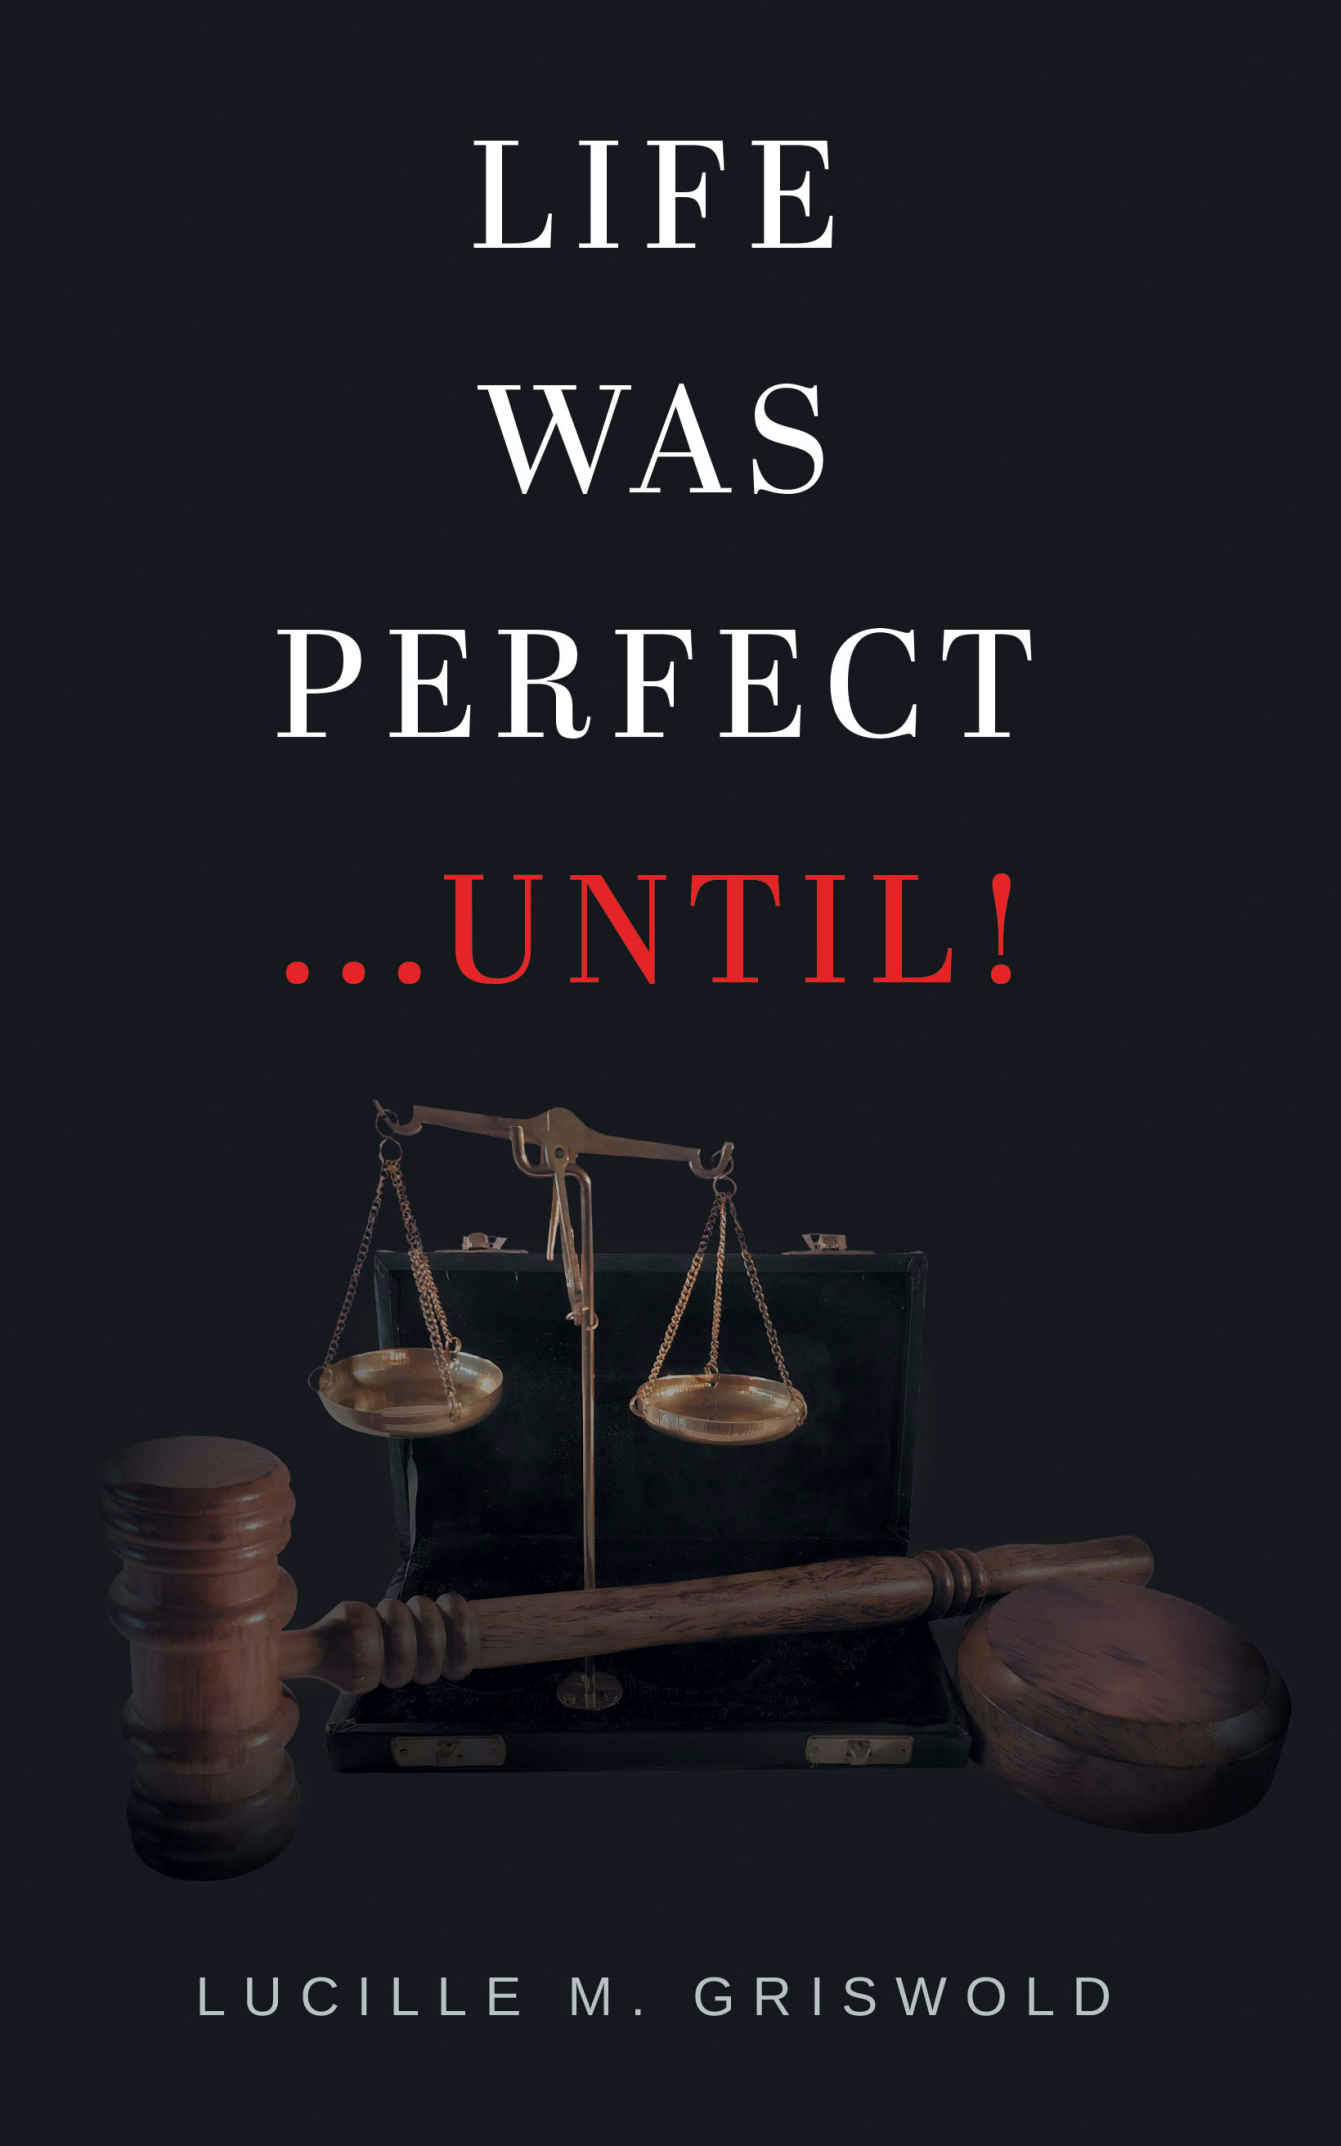 Life Was Perfect…Until!